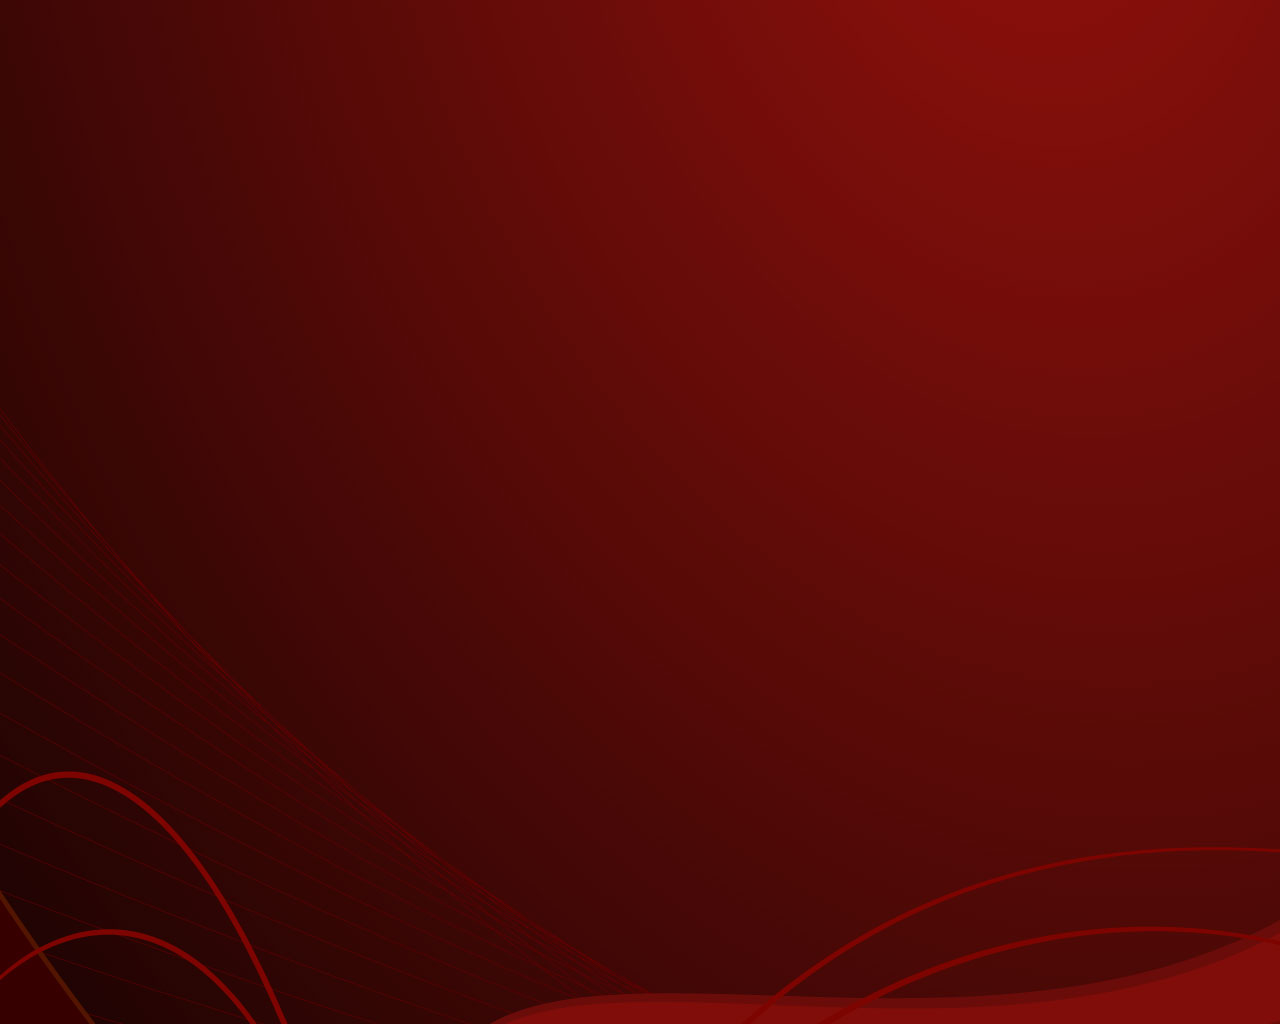 Red Lines Effect Backgrounds - Dark Red Powerpoint Background - 1280x1024  Wallpaper 